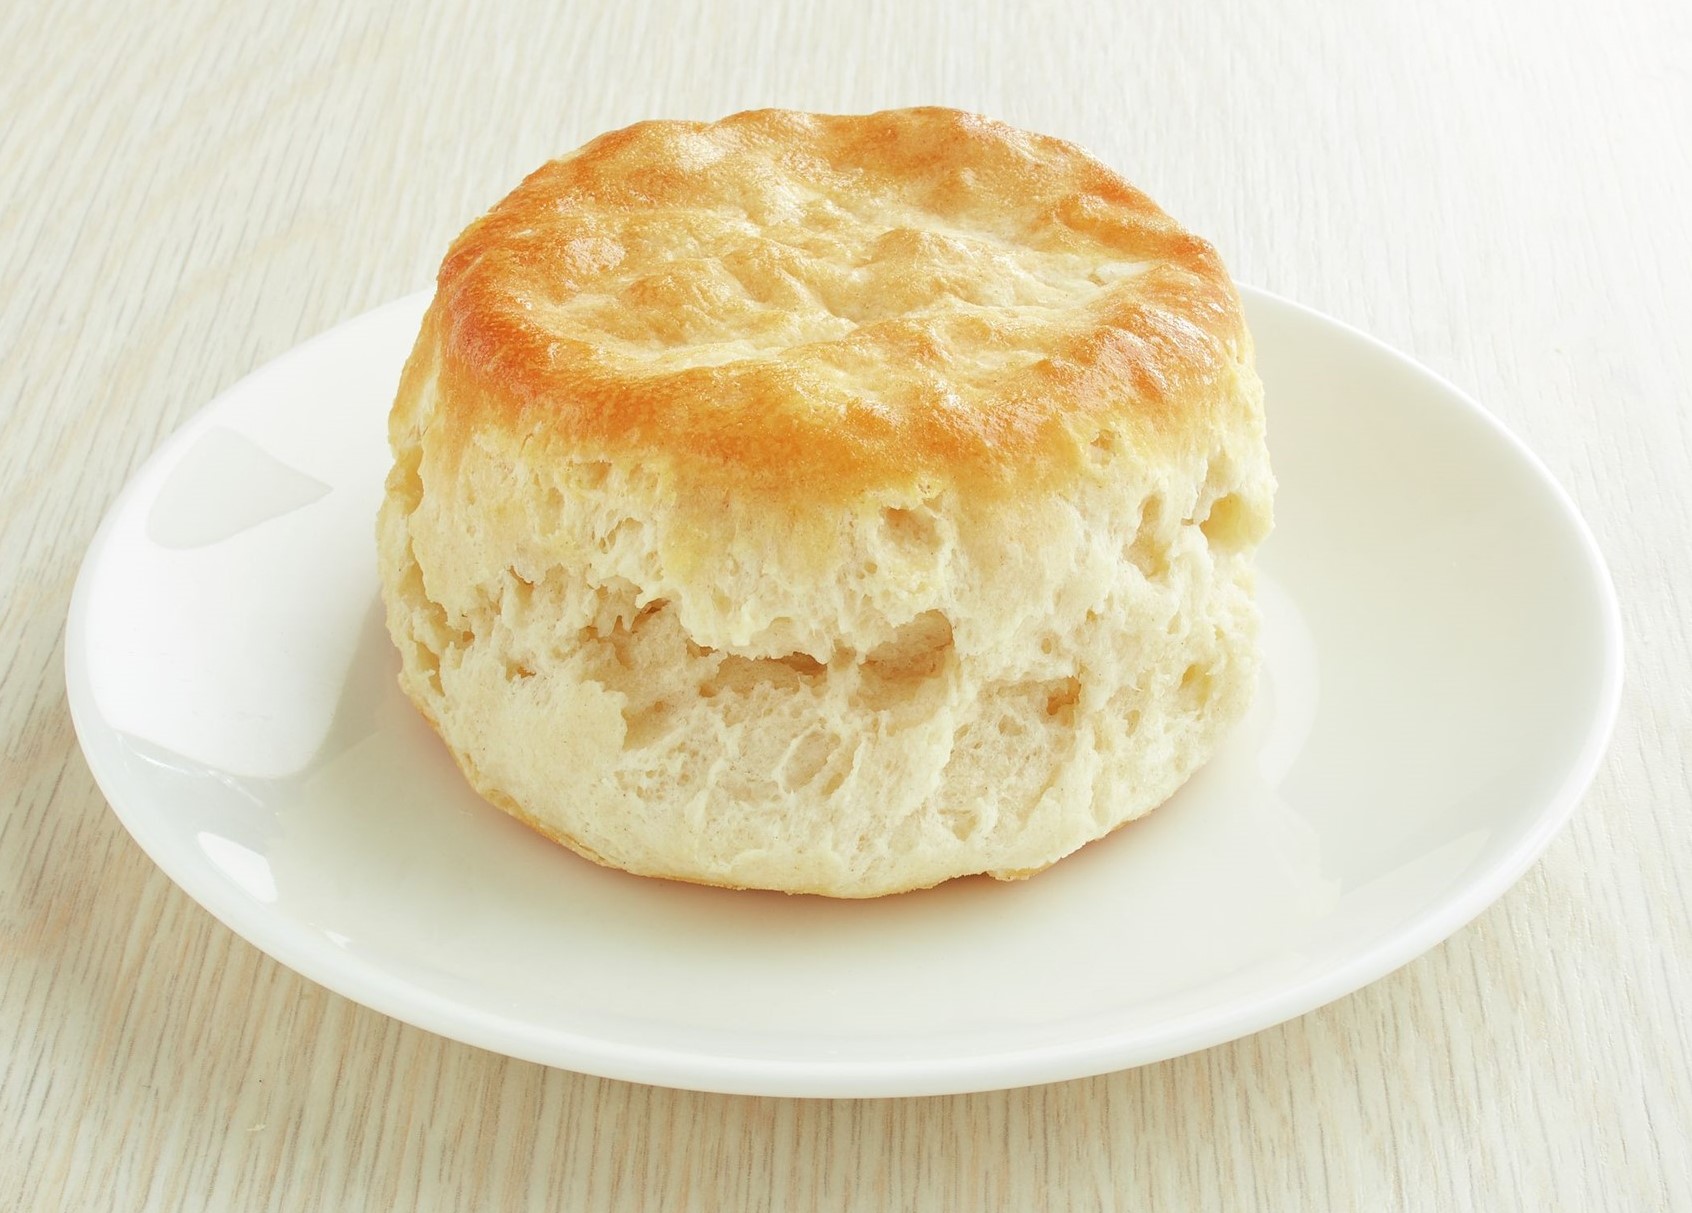 Big, Fluffy, Buttery Southern-Style Biscuit